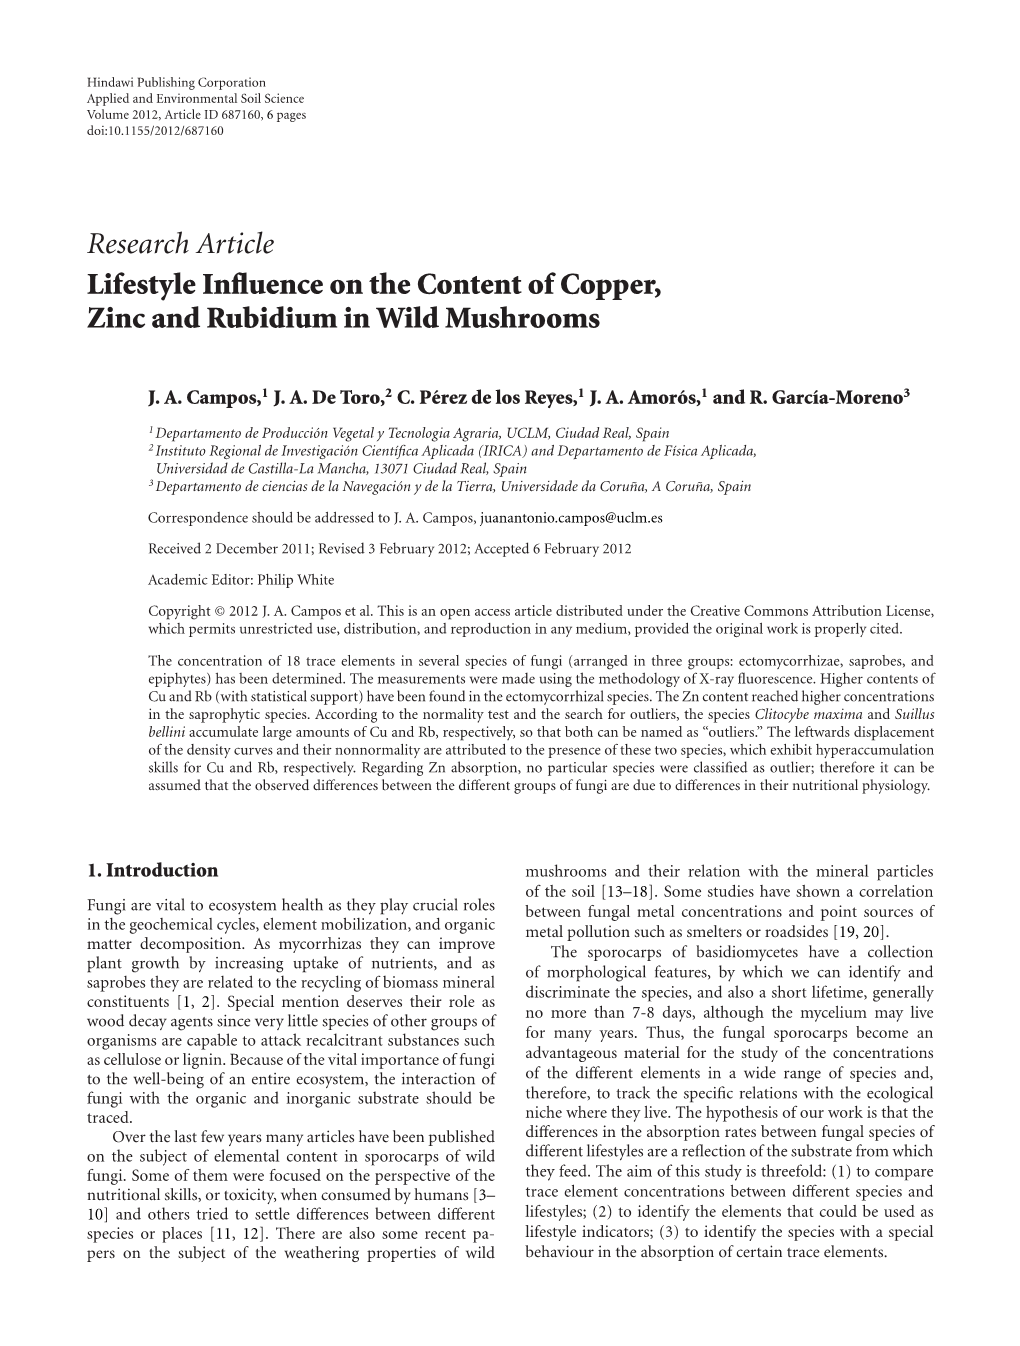 Lifestyle Influence on the Content of Copper, Zinc and Rubidium in Wild